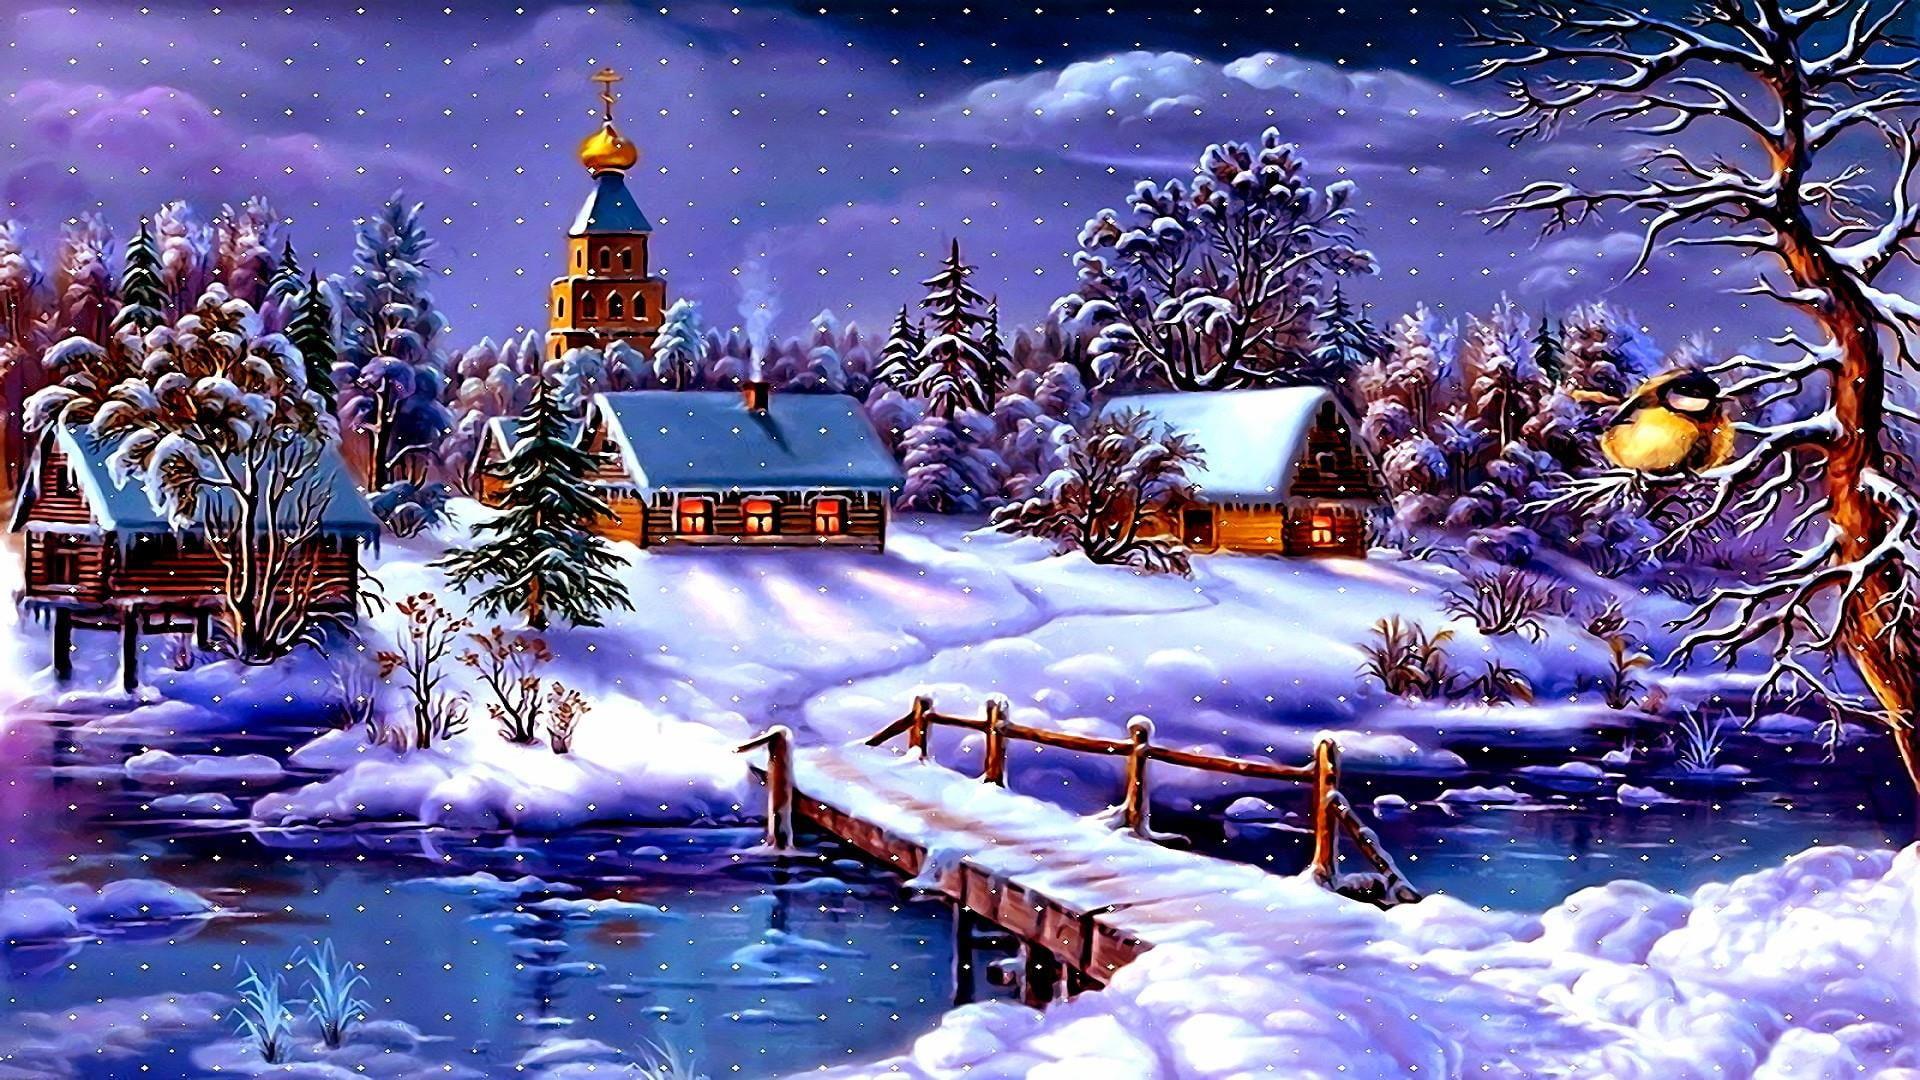 Snowy Christmas Night Art Wallpapers - Wallpaper Cave